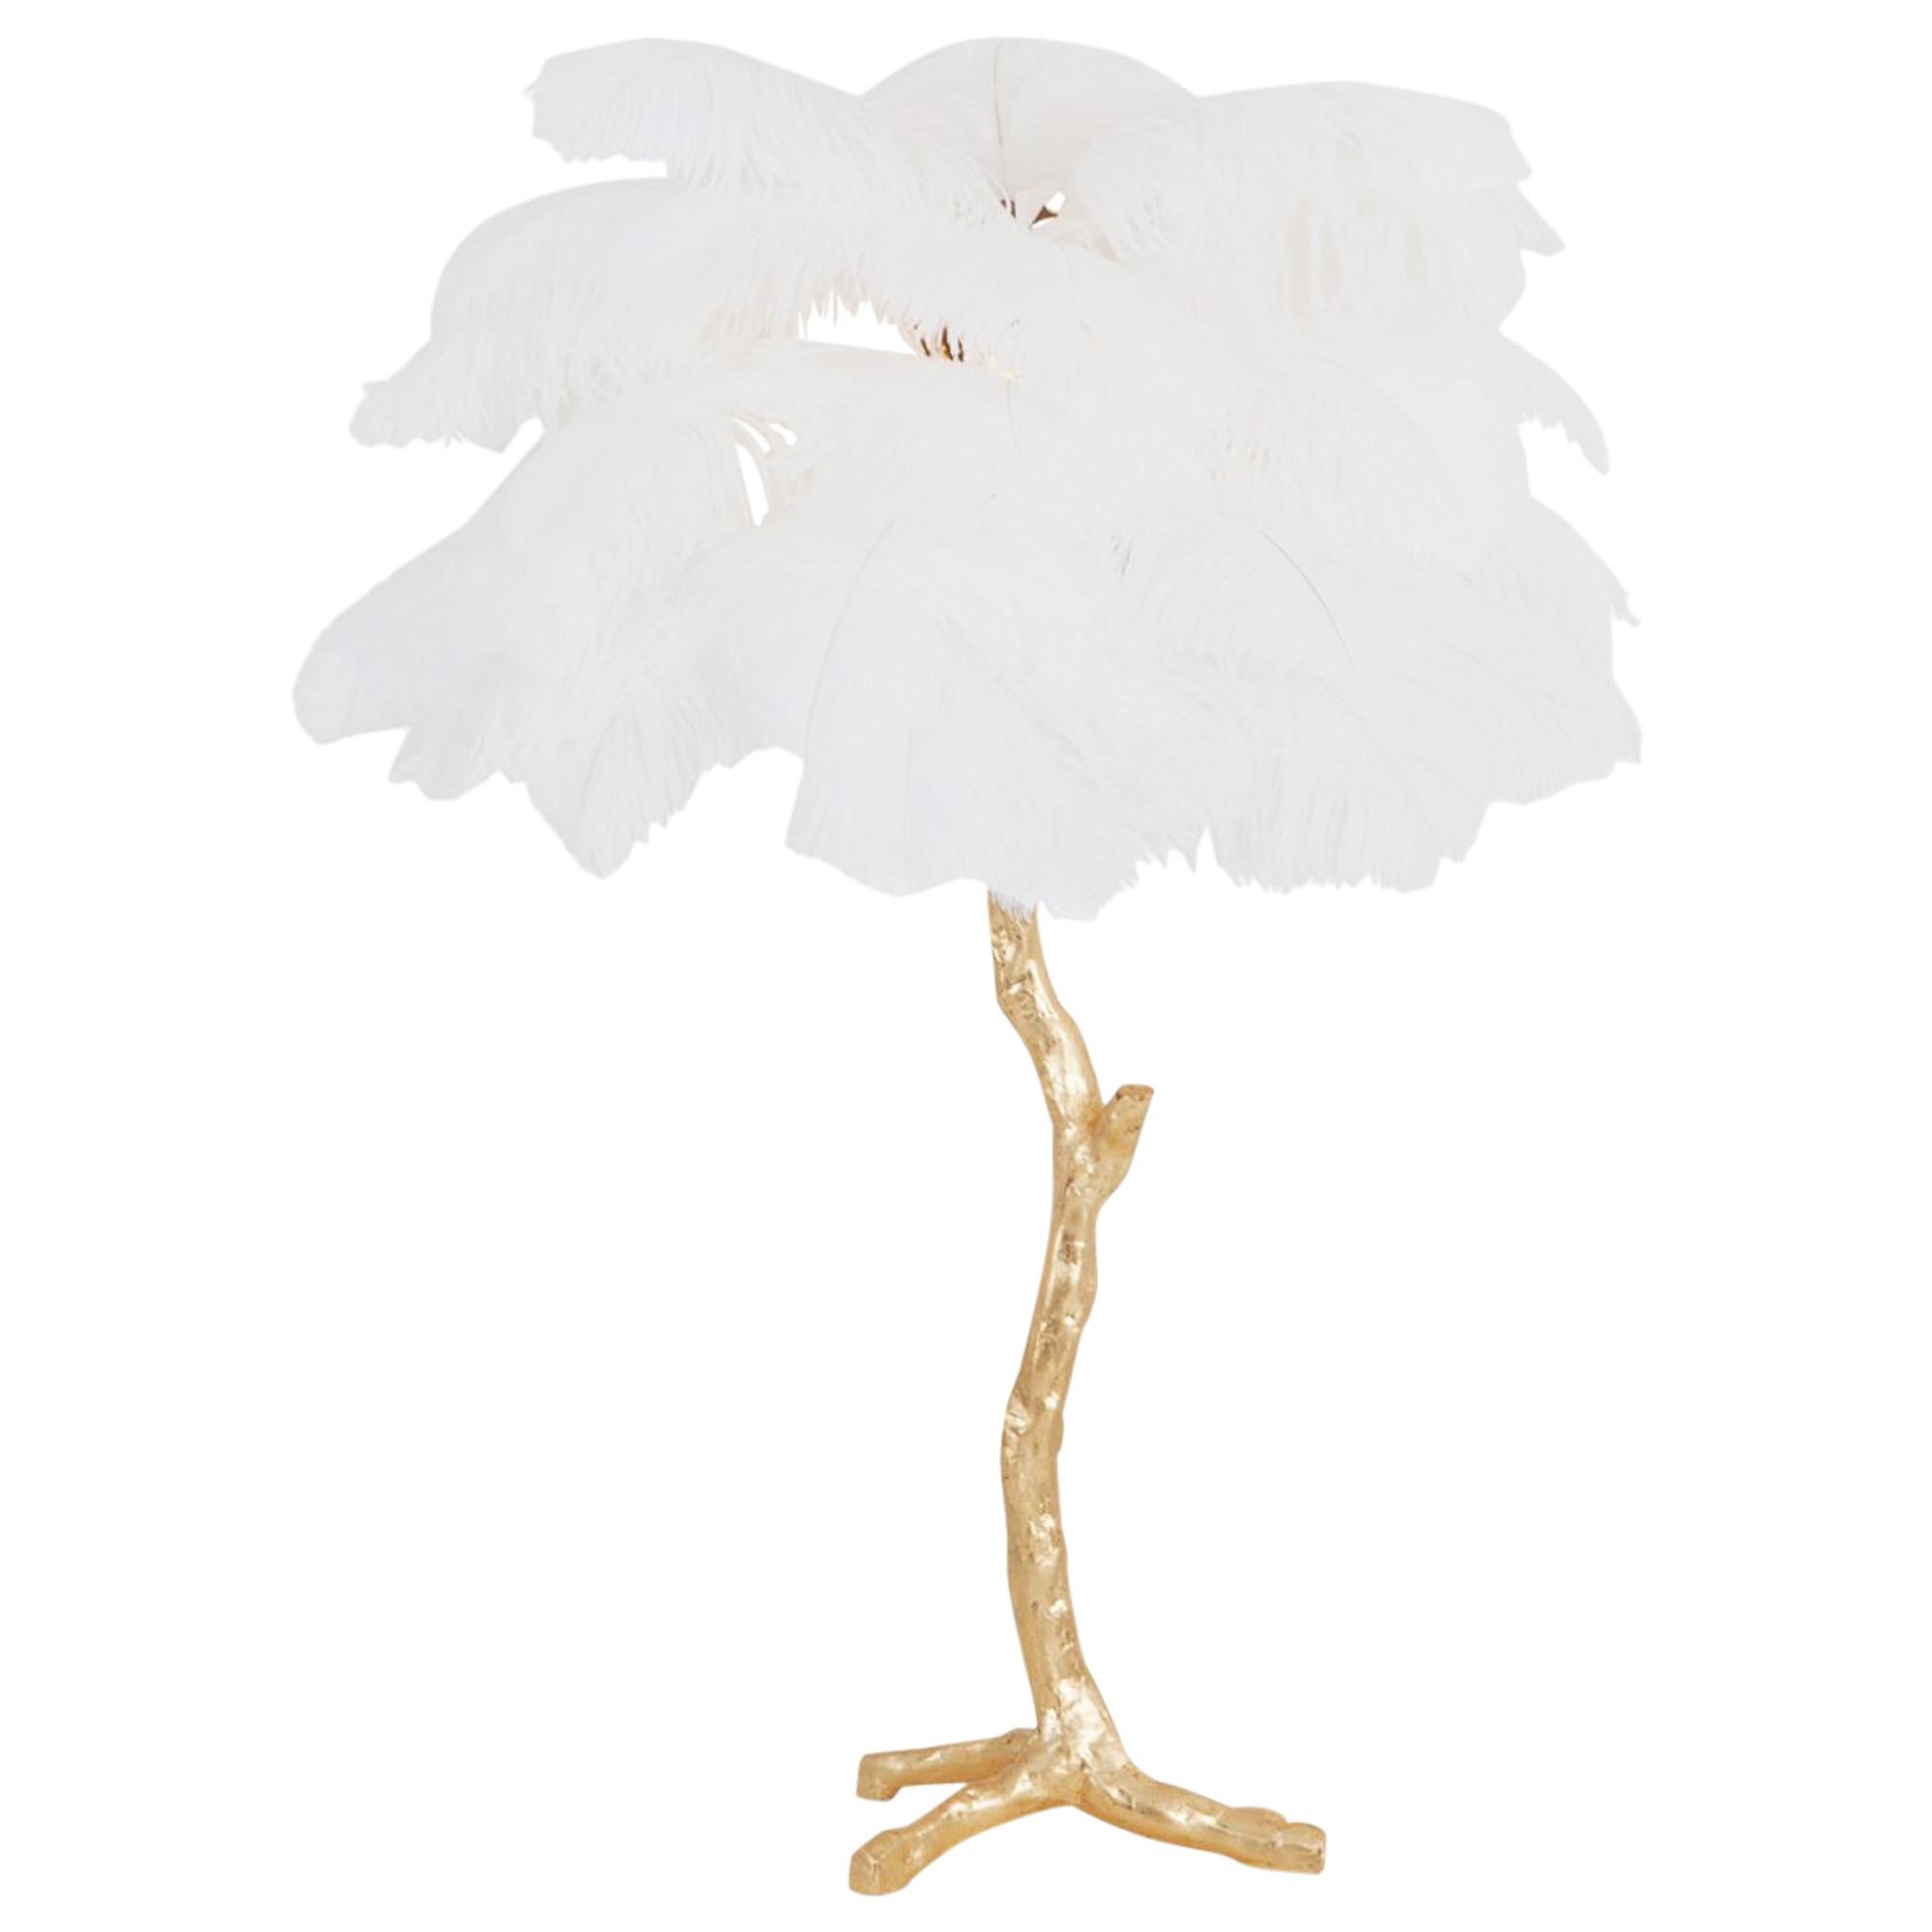 Contemporary Hollywood Regency lamp with golden resin stem and white colored ostrich feathers

Decorative luxury piece that fits well in an eclectic Hollywood Regency inspired metropolitan interior

We can also offer the larger floor lamp model.